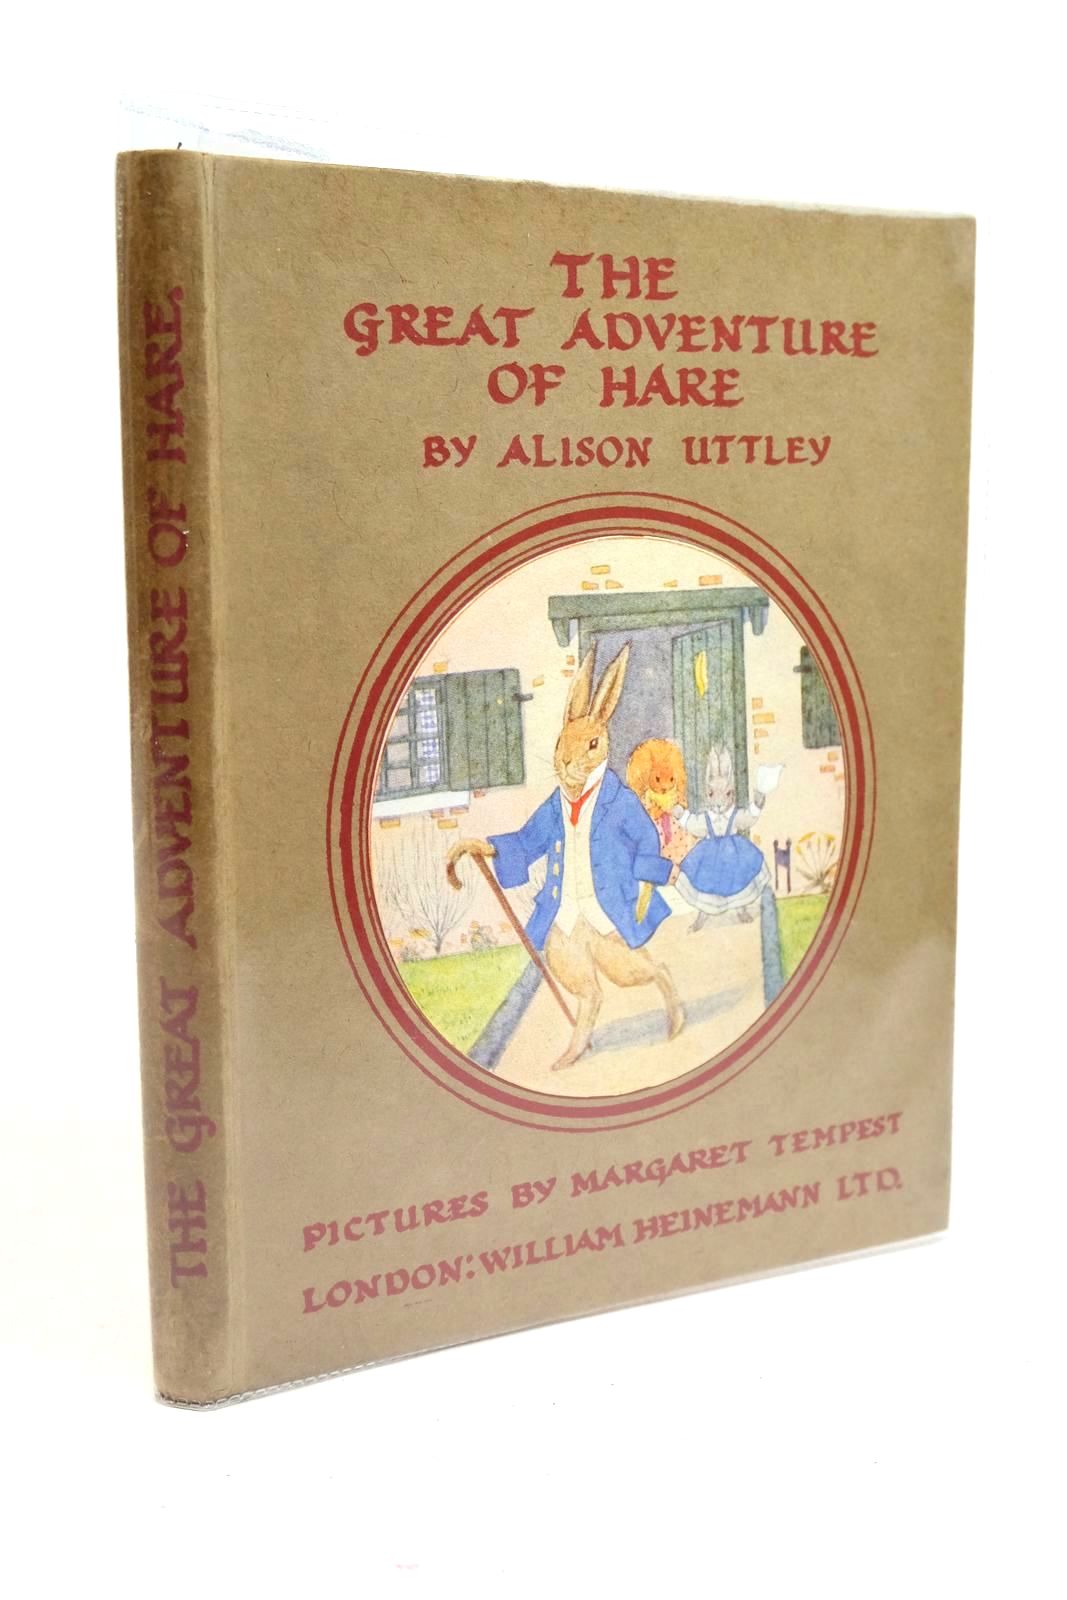 Photo of THE GREAT ADVENTURE OF HARE written by Uttley, Alison illustrated by Tempest, Margaret published by William Heinemann Ltd. (STOCK CODE: 1321346)  for sale by Stella & Rose's Books